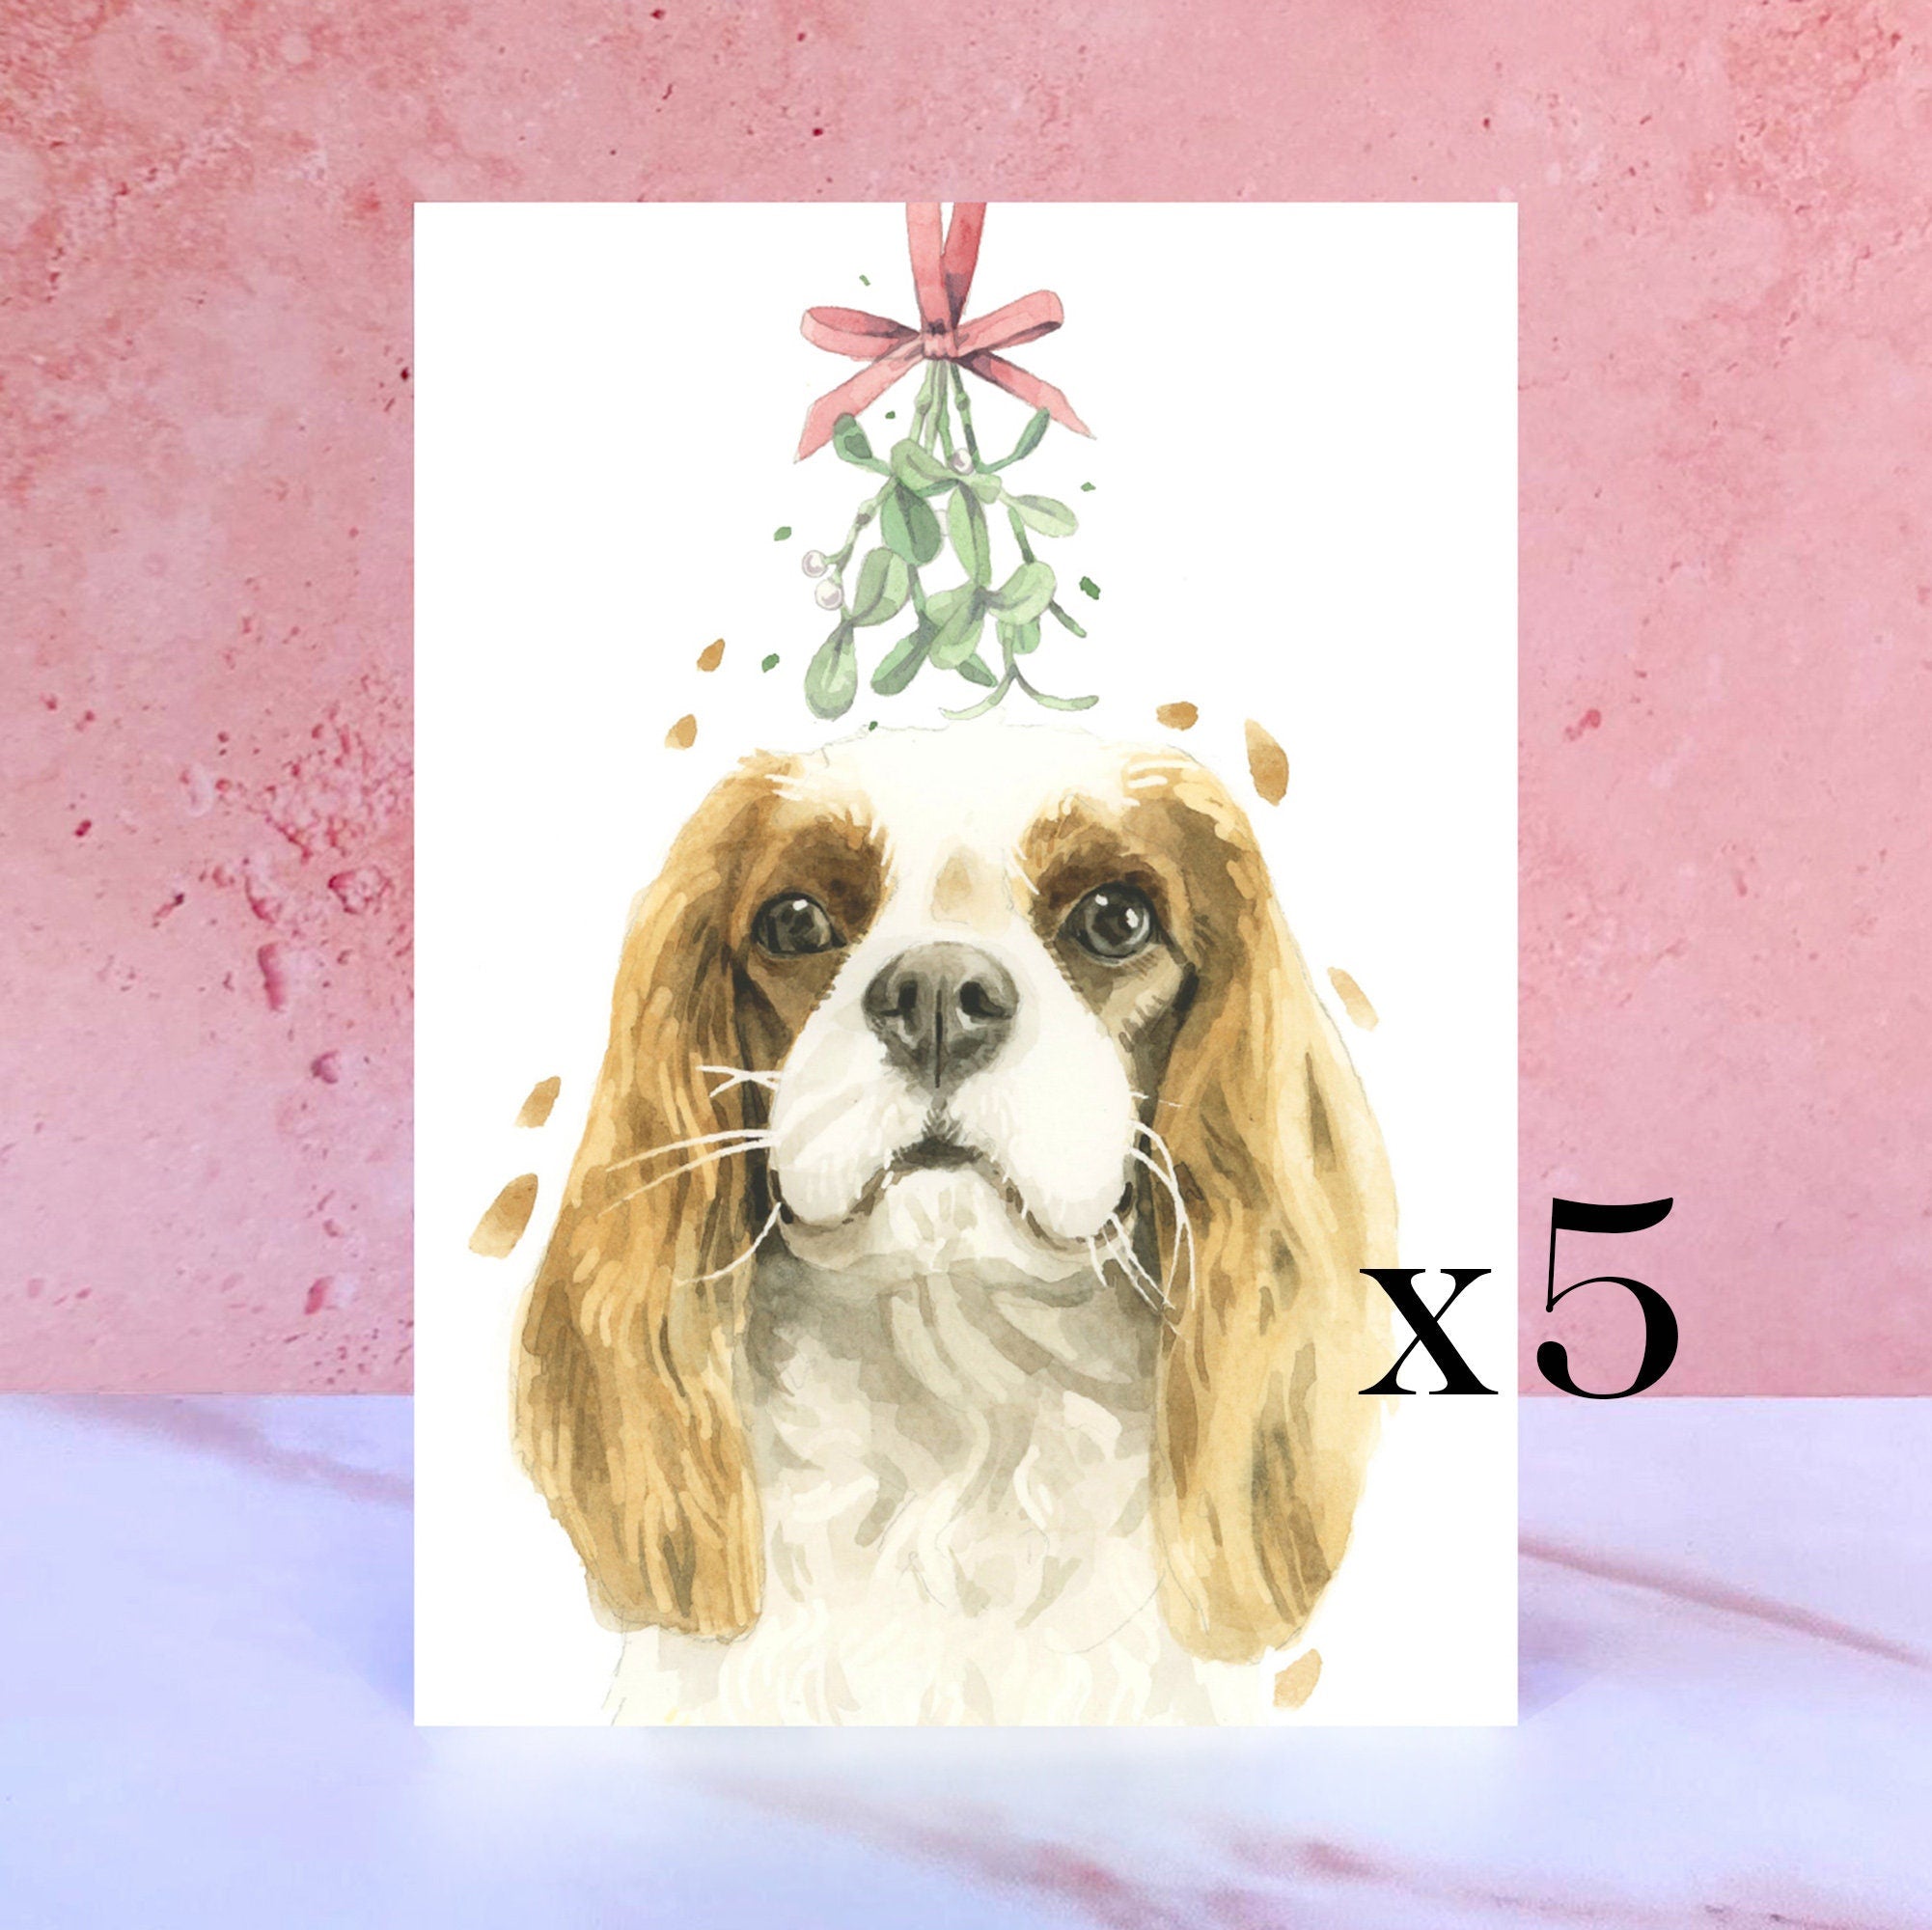 Pack of 5 Cavalier King Charles Spaniel Christmas Cards